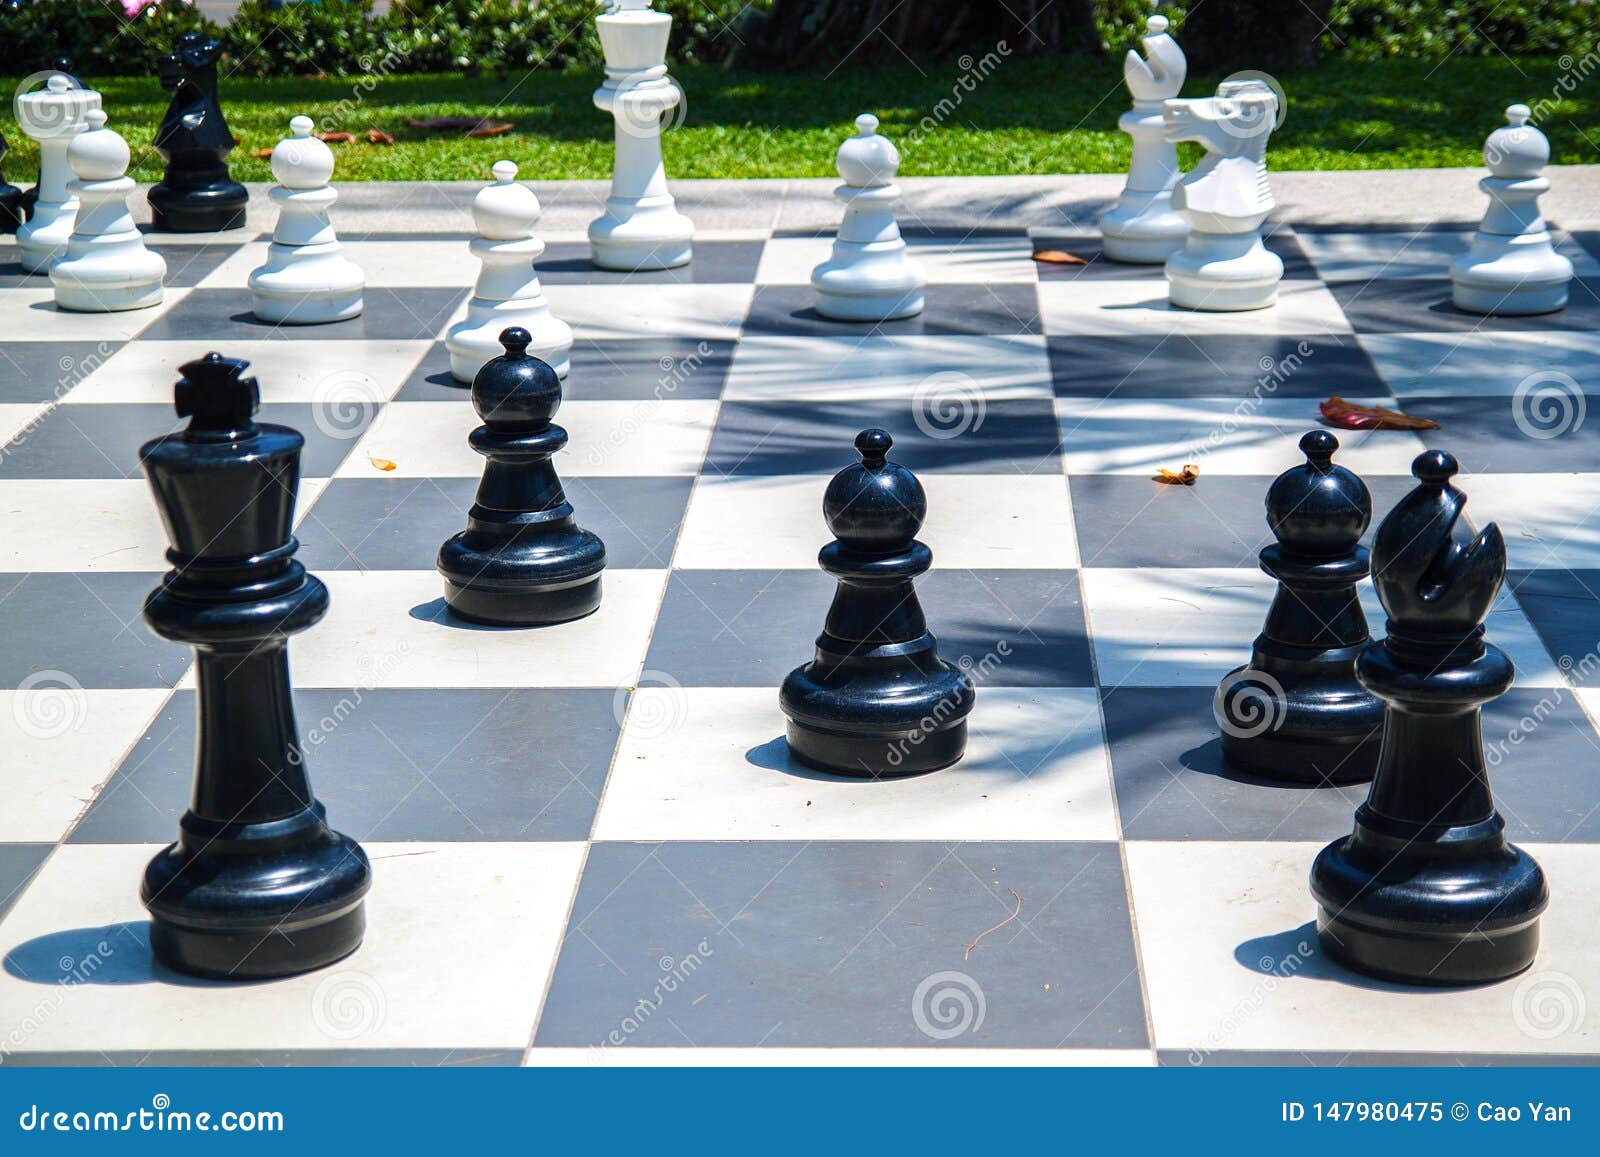 Figures for Game in Chess on the Nature. Stock Image - Image of chess, intelligence: